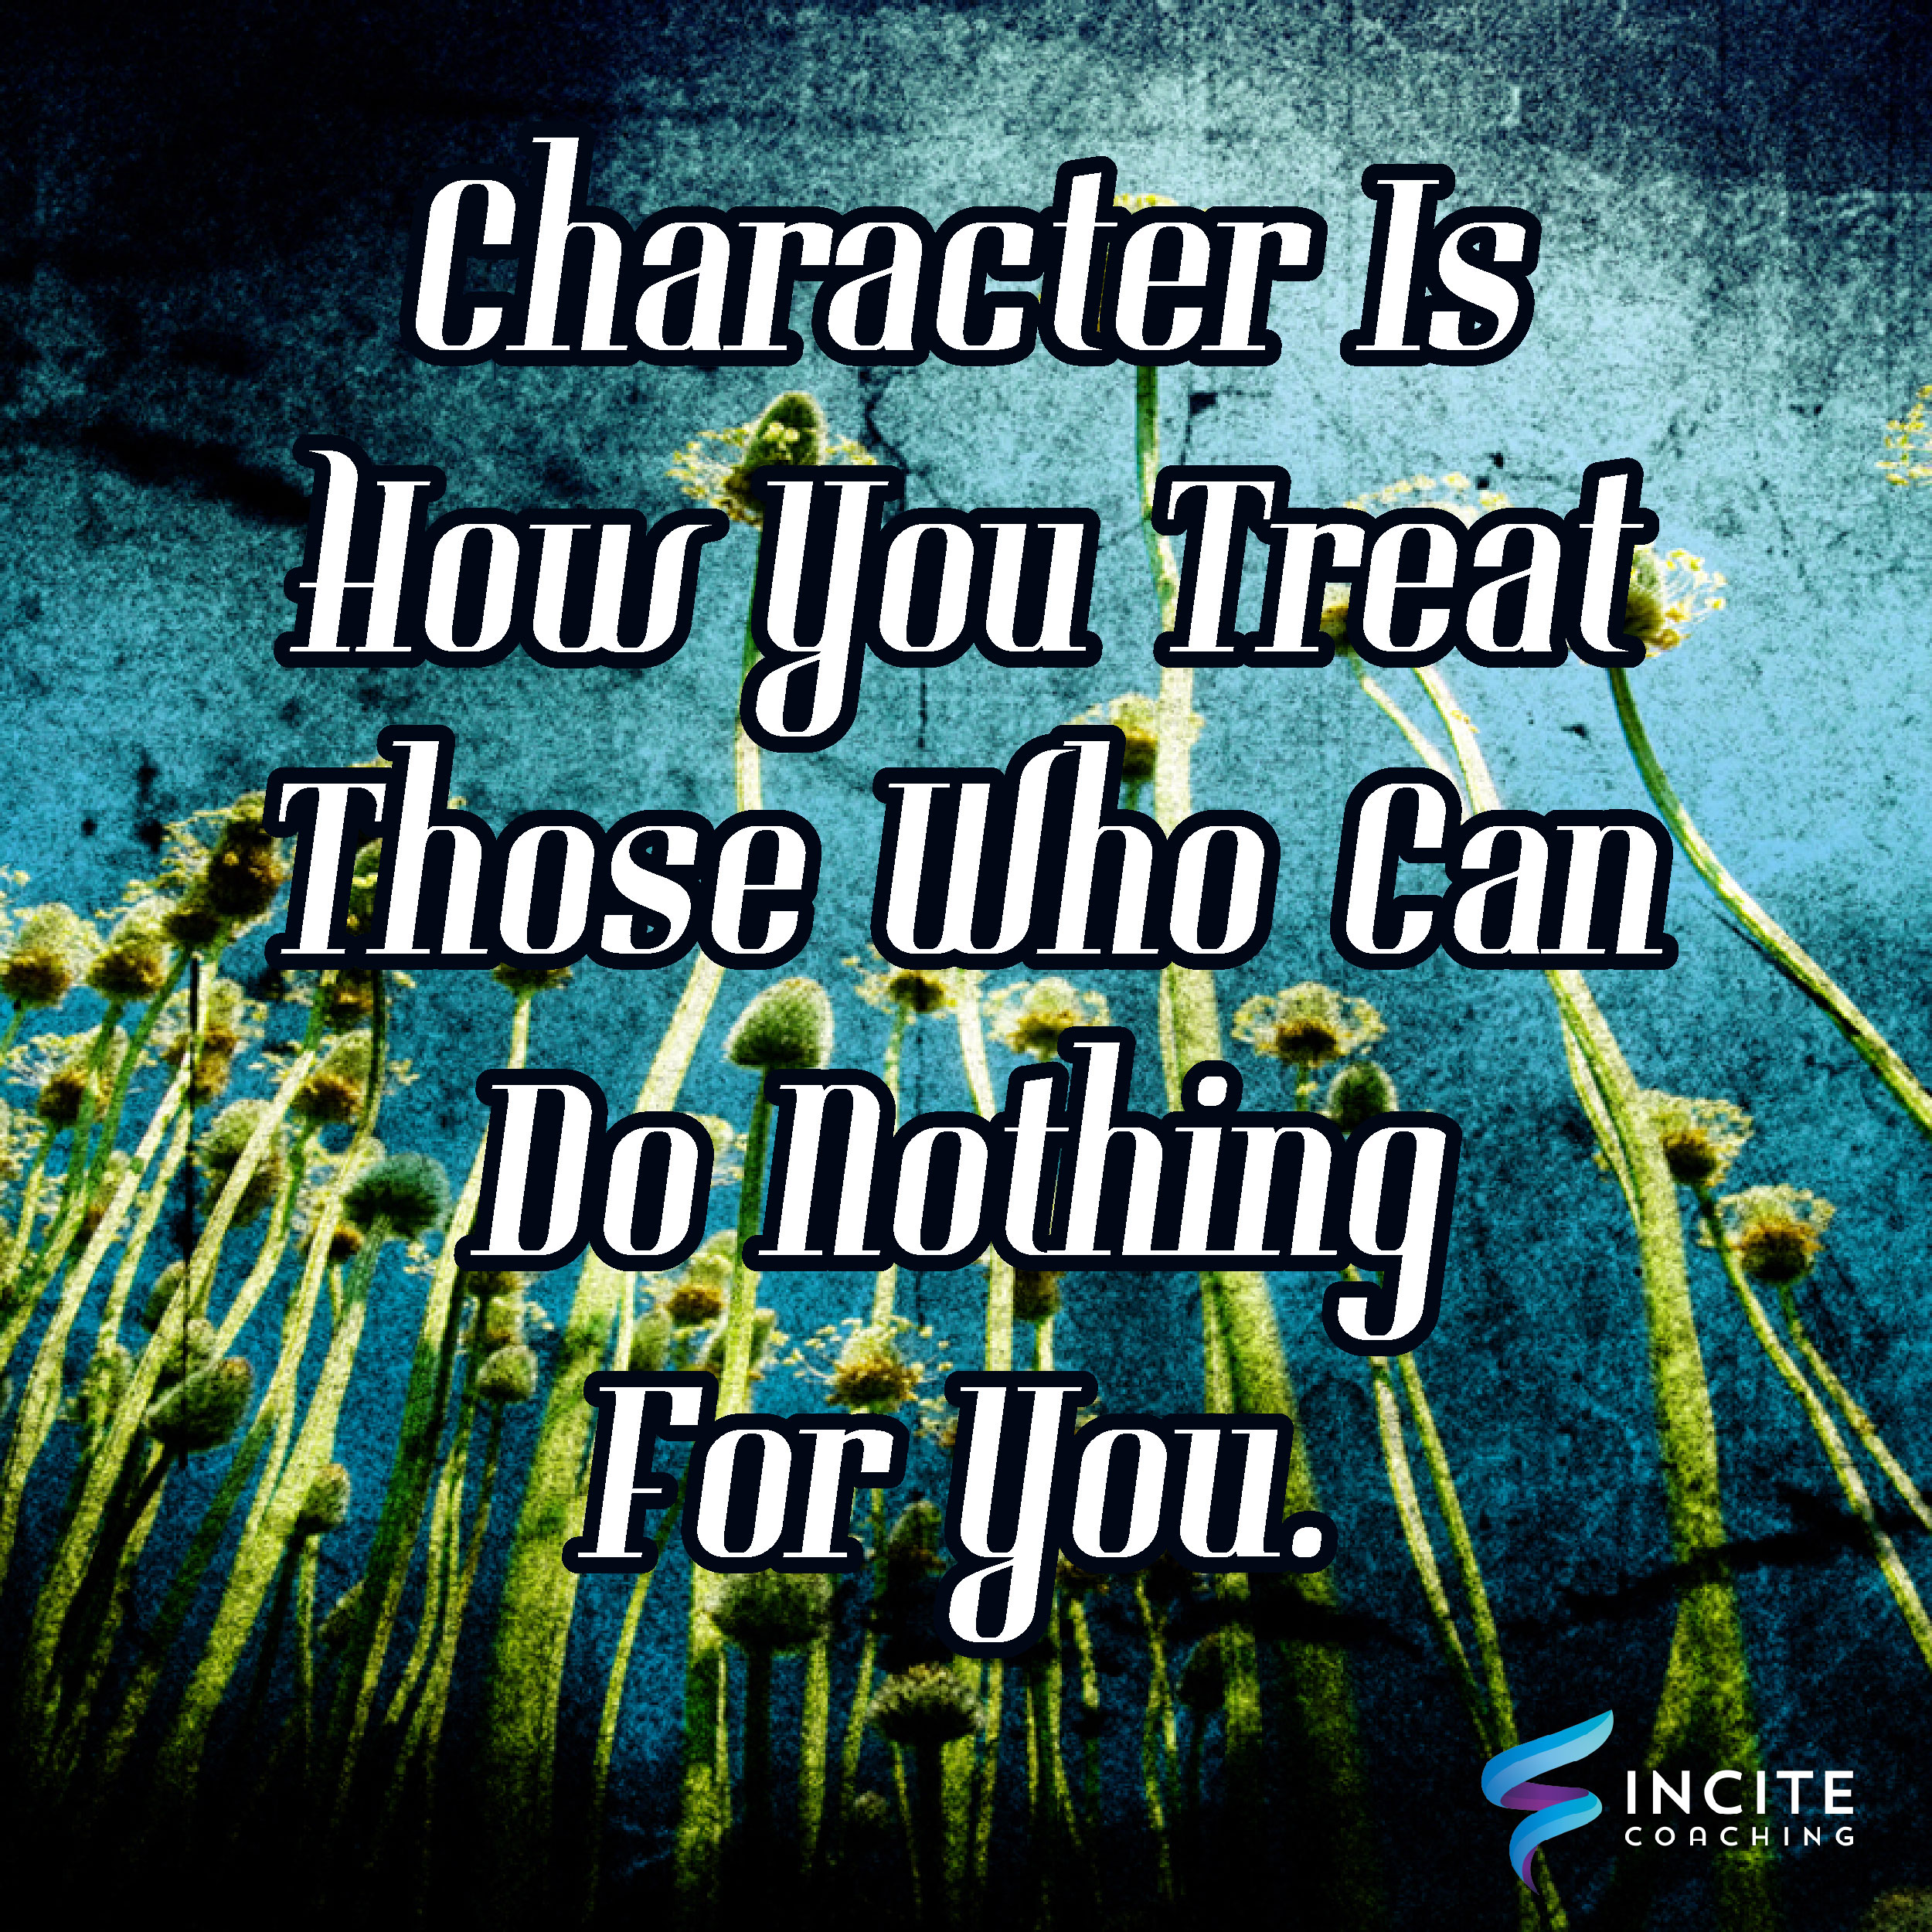 Show Your Good Character